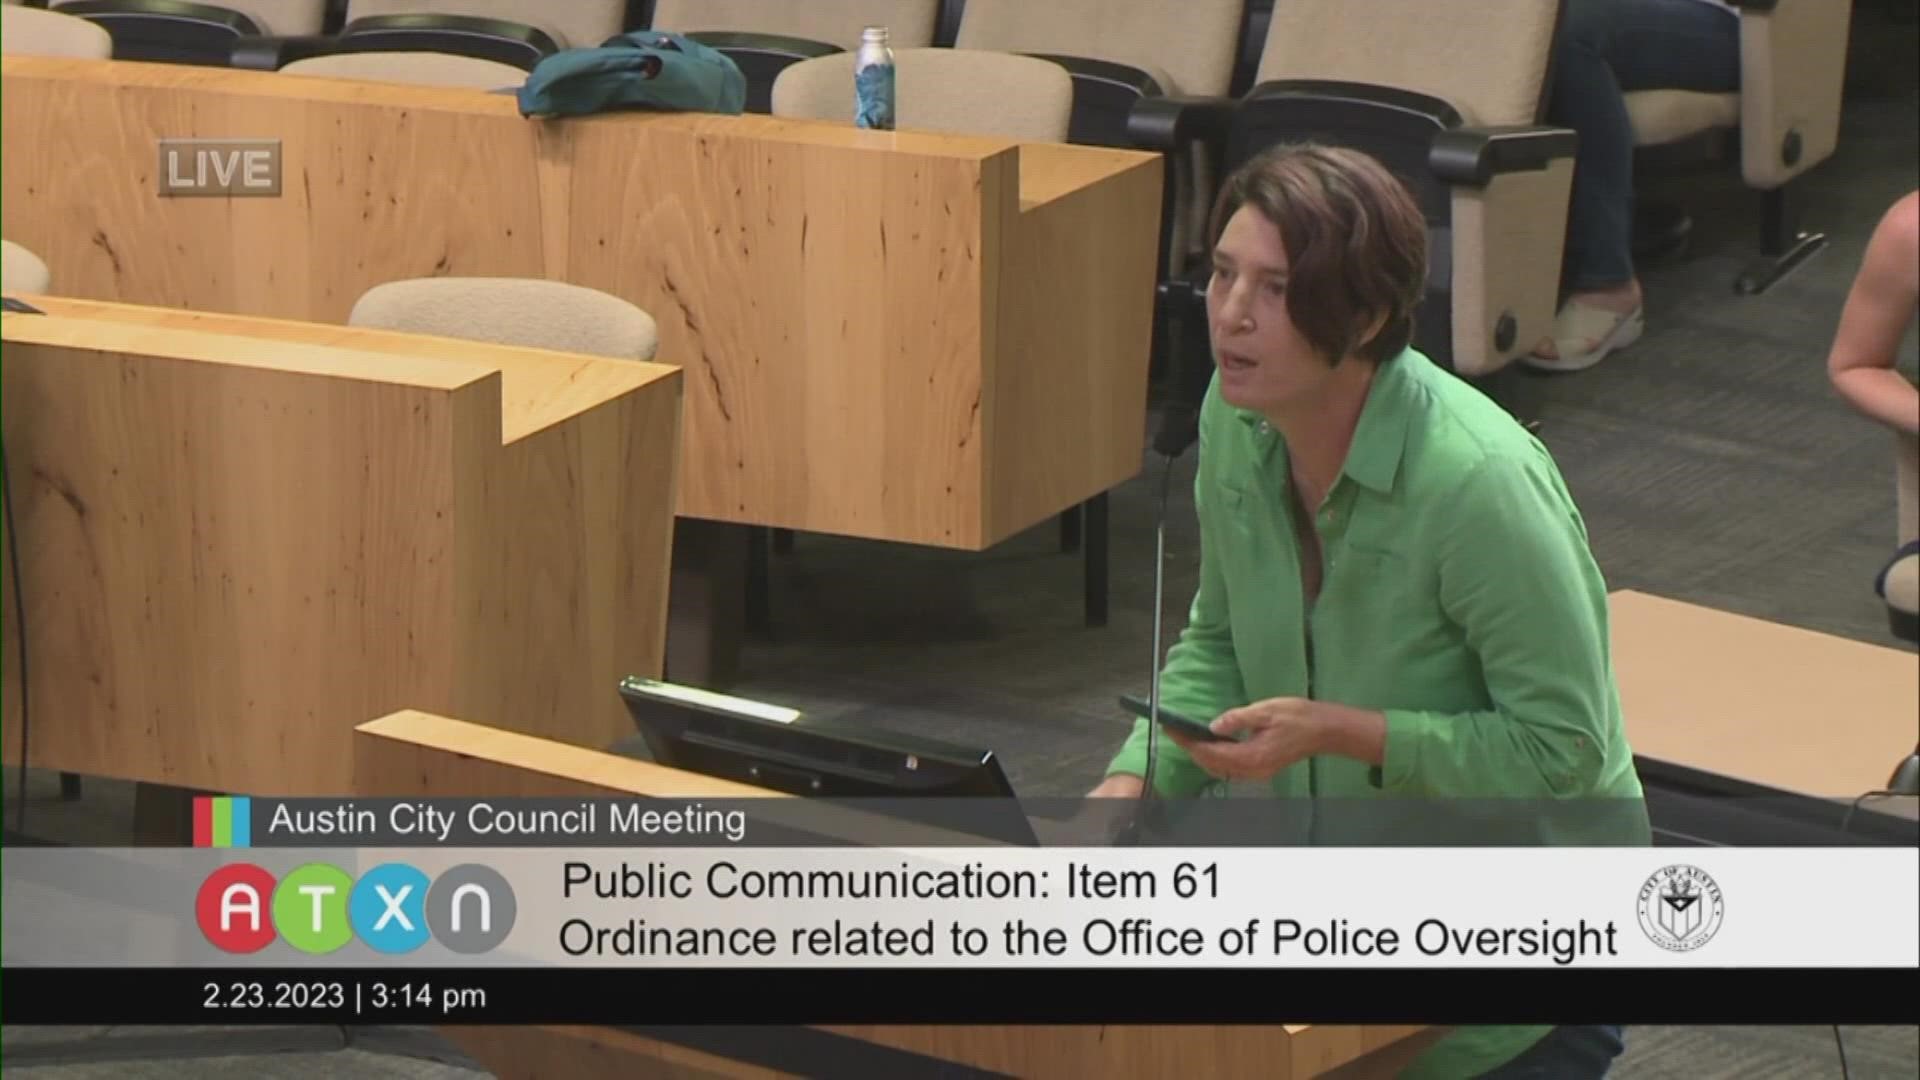 The council approved the resolution to act as a stopgap measure to preserve some officer benefits and oversight measures in case the current contract lapses.